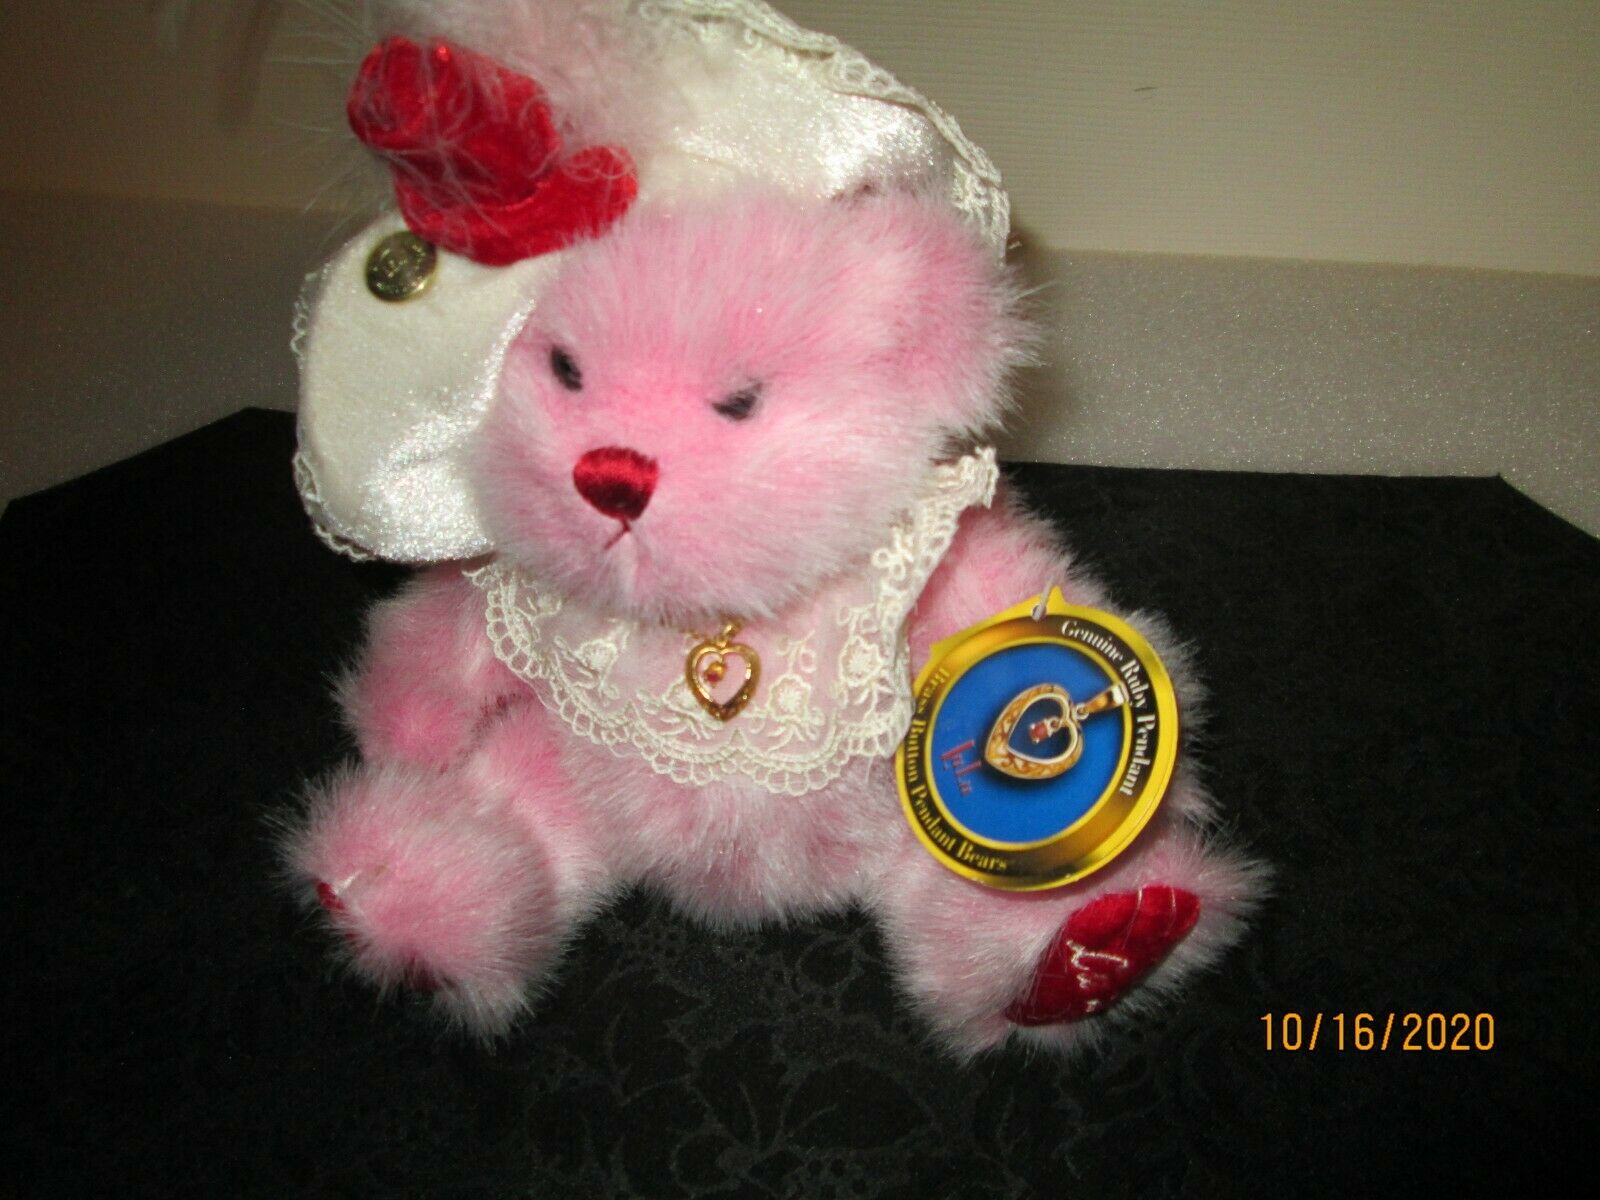 Brass Button Pendant Bears Year 2000 Vtg Pink Plush 9 Inches Named "lulu"